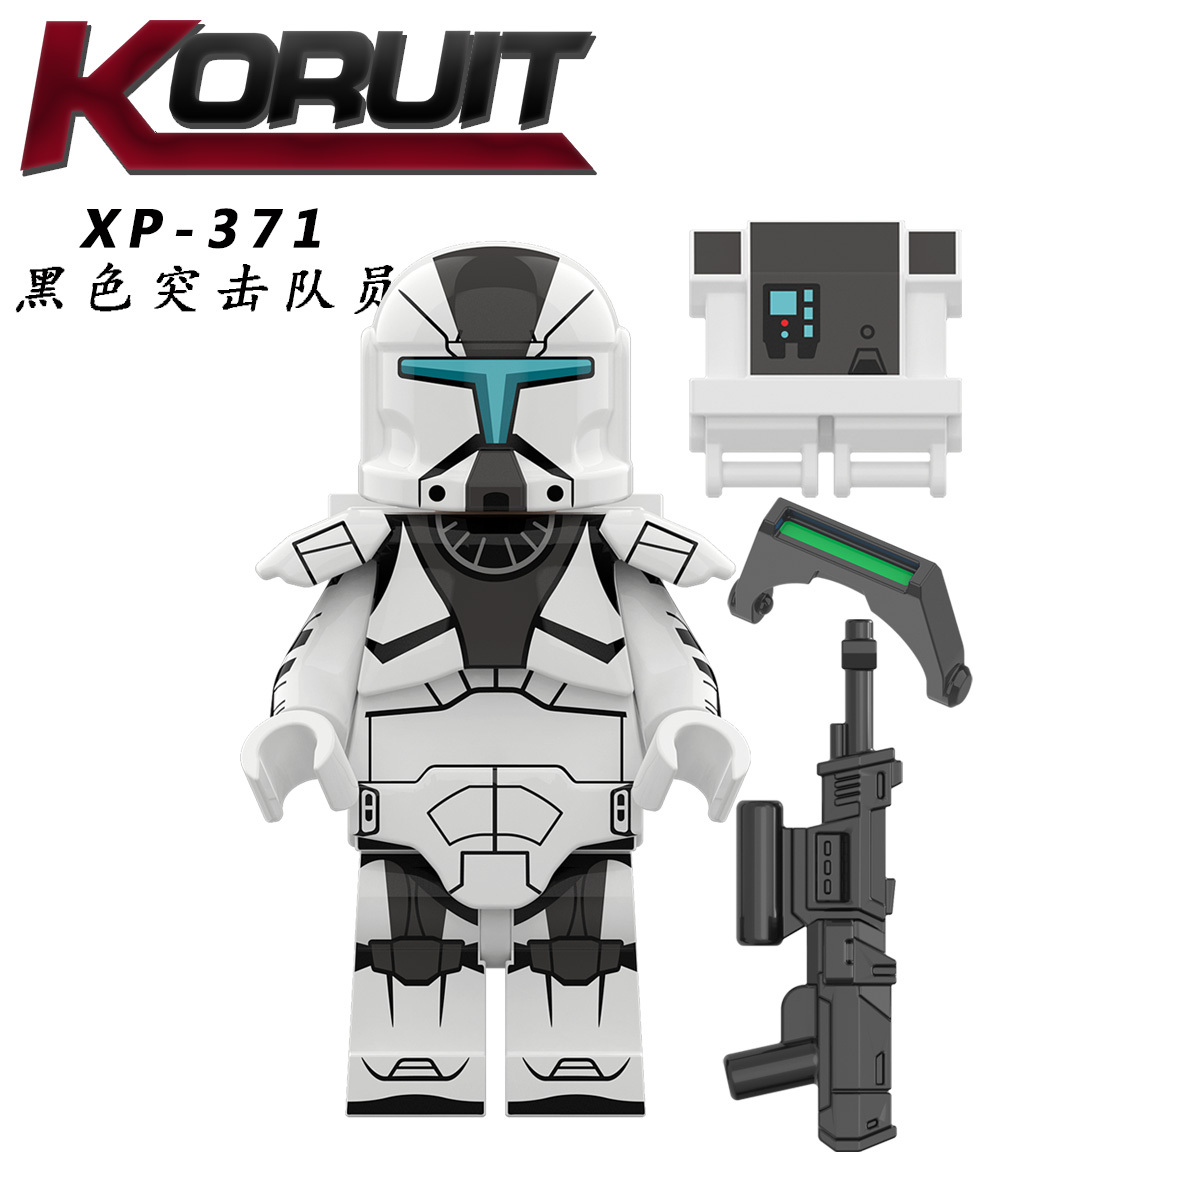 XP369 XP370 XP371 XP372 XP373 XP374 XP375 XP376 XP377 XP378 XP379 XP380 Star Wars Famous Movie Series Characters Bricks Building Blocks Action Figures Educational Toys For Children's Gifts KT1048 KT1049